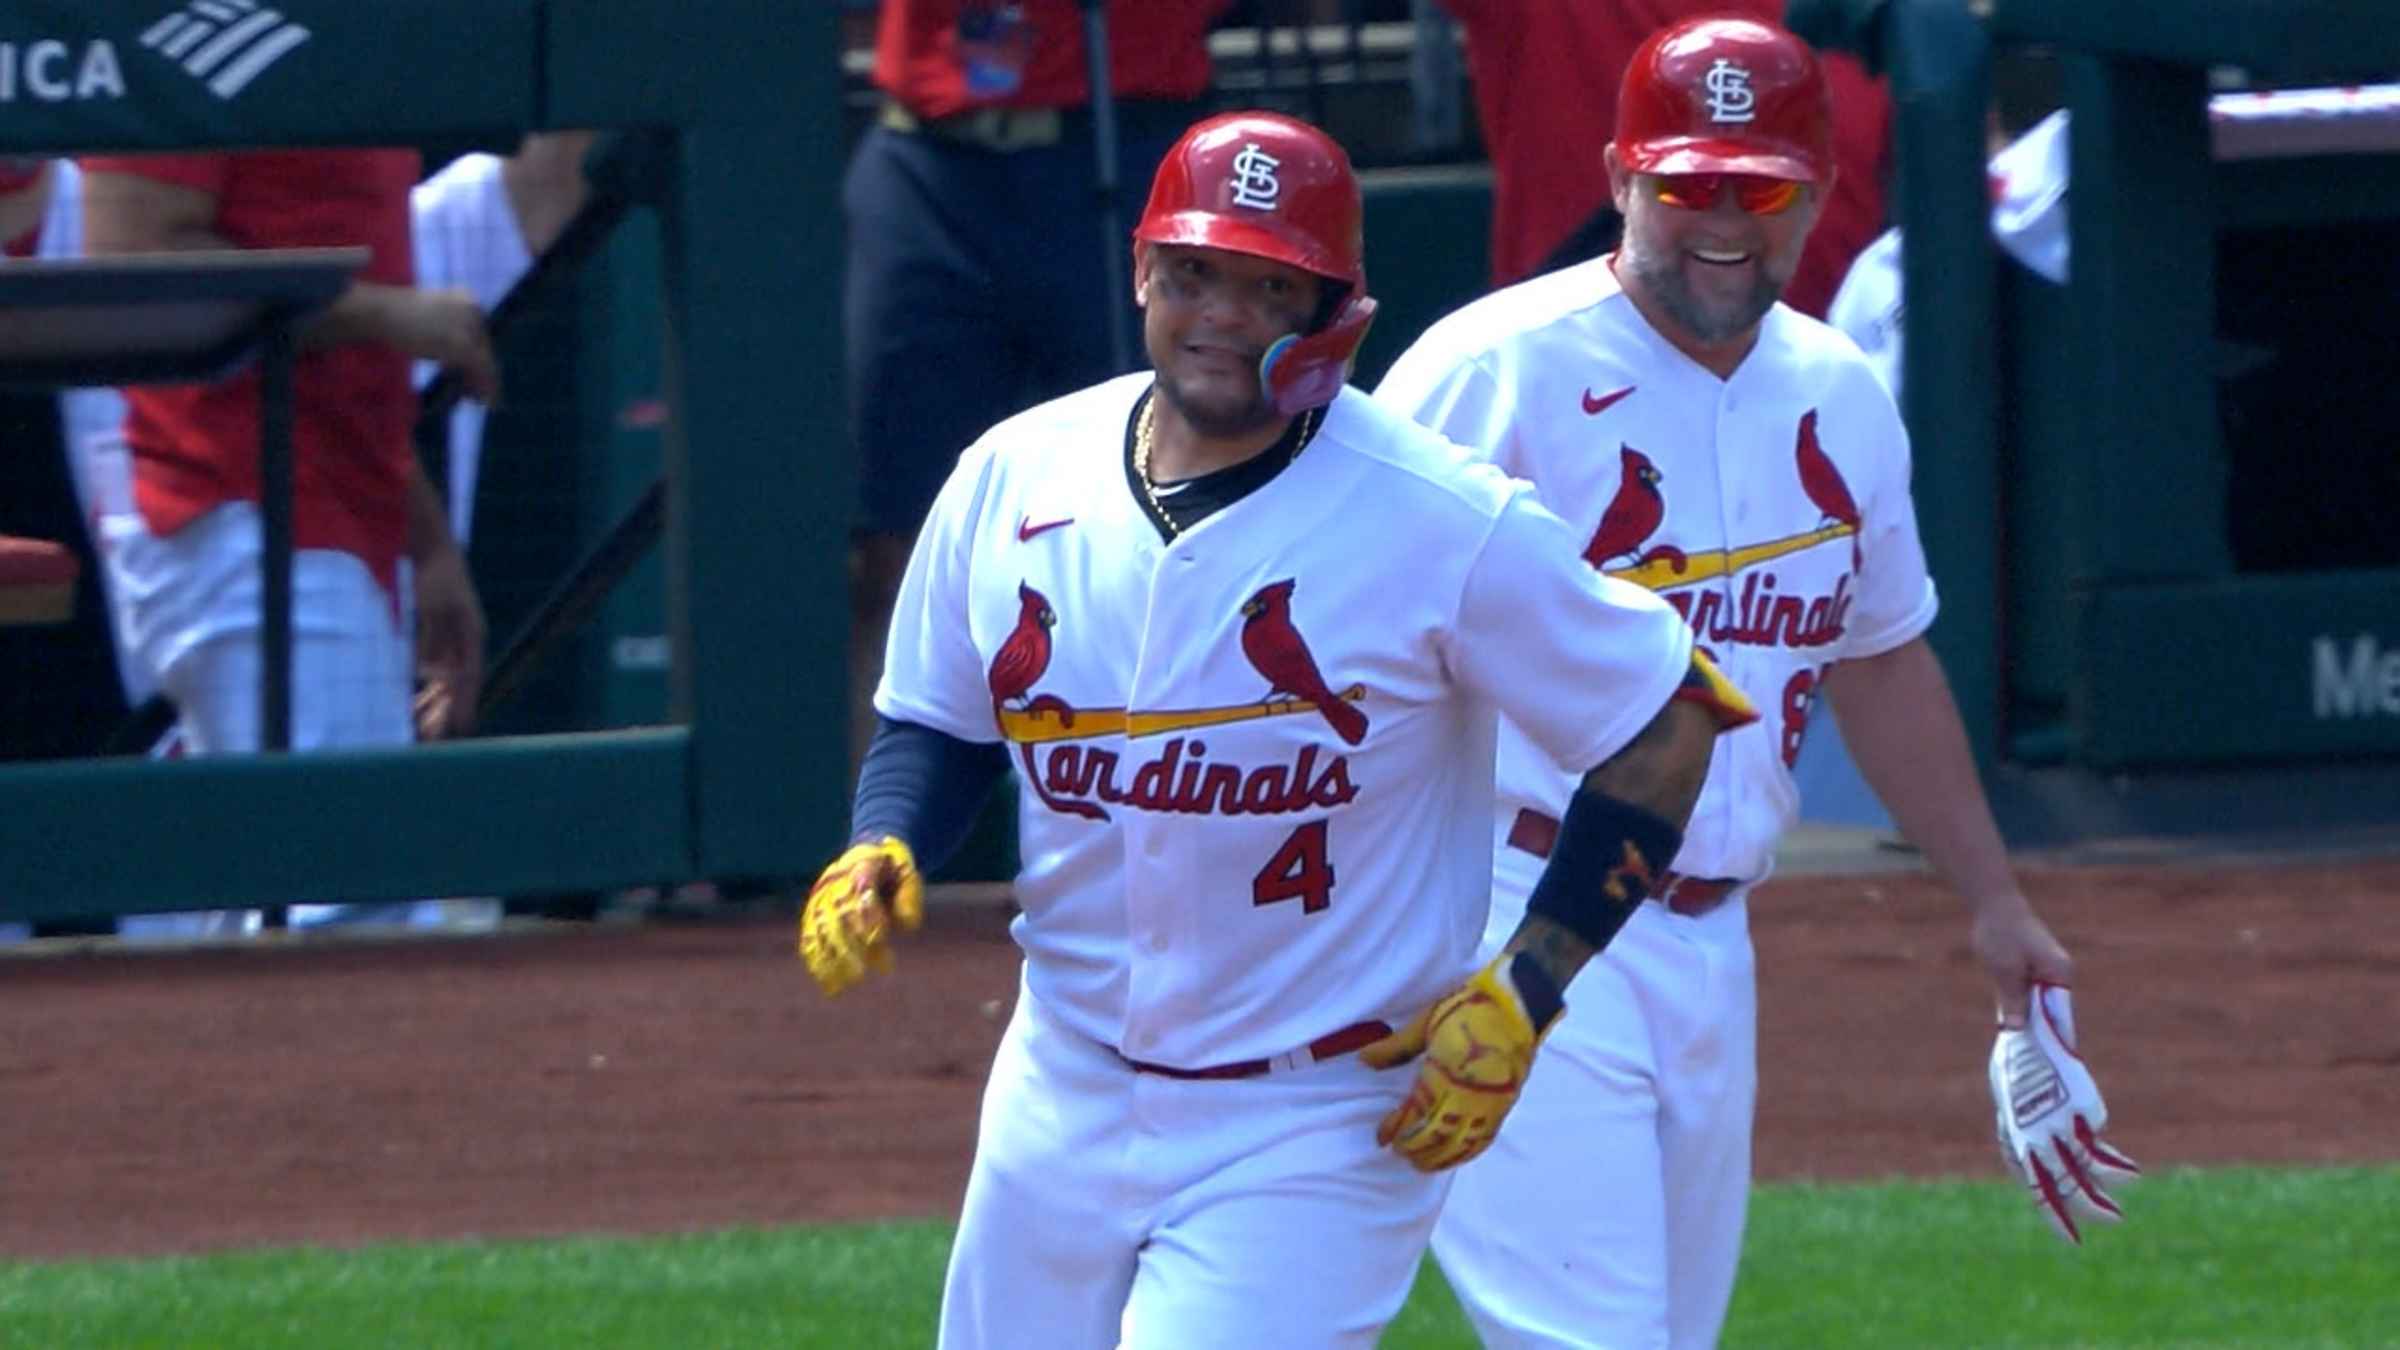 Yadi, Waino Set MLB Record for Starts as a Battery in 4-1 Victory